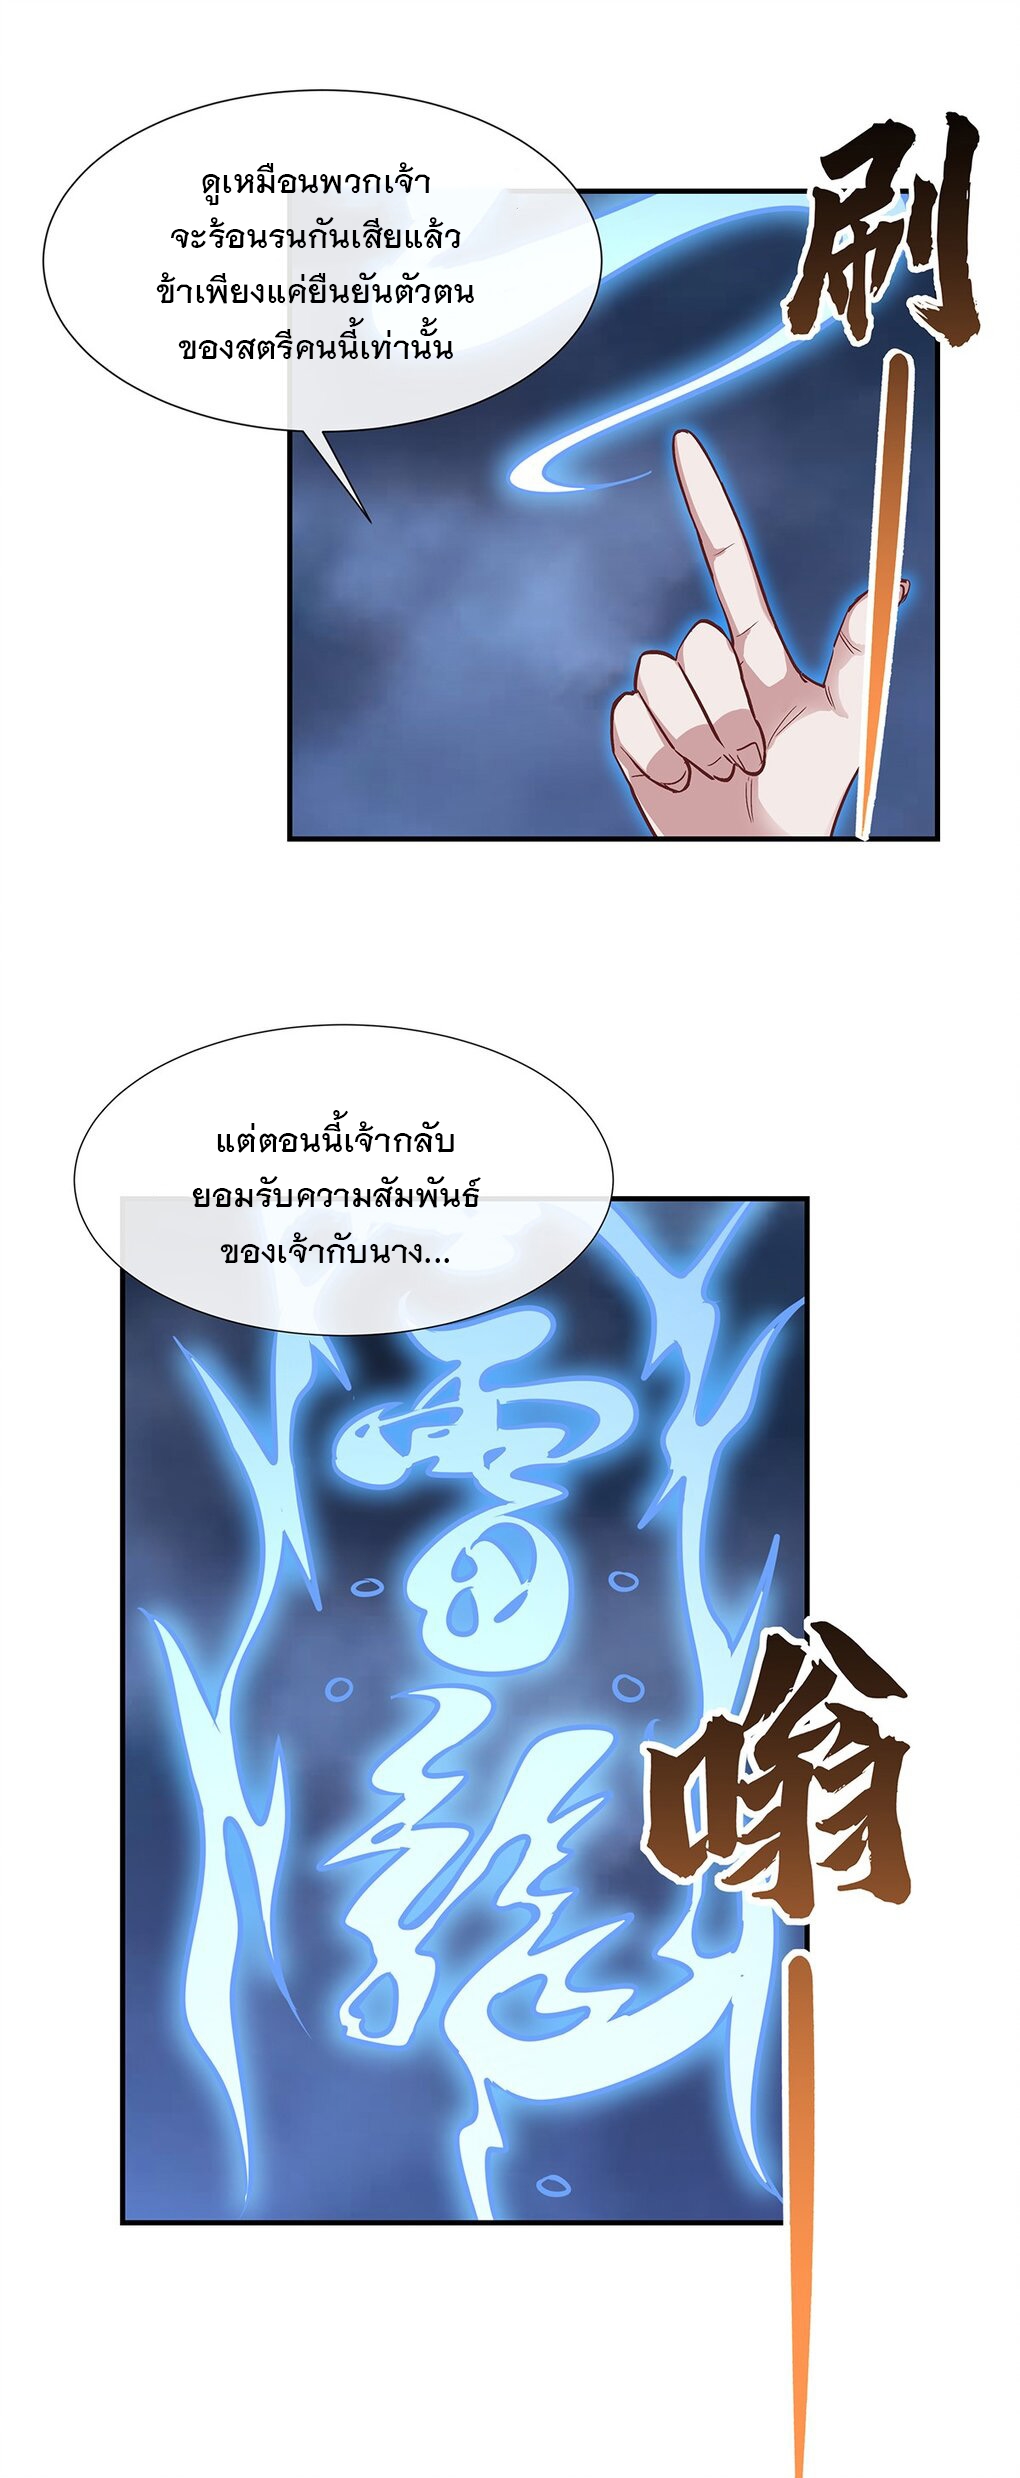 My Female Apprentices Are All Big Shots From the Future Ã Â¸â€¢Ã Â¸Â­Ã Â¸â„¢Ã Â¸â€”Ã Â¸ÂµÃ Â¹Ë† 97 (42)